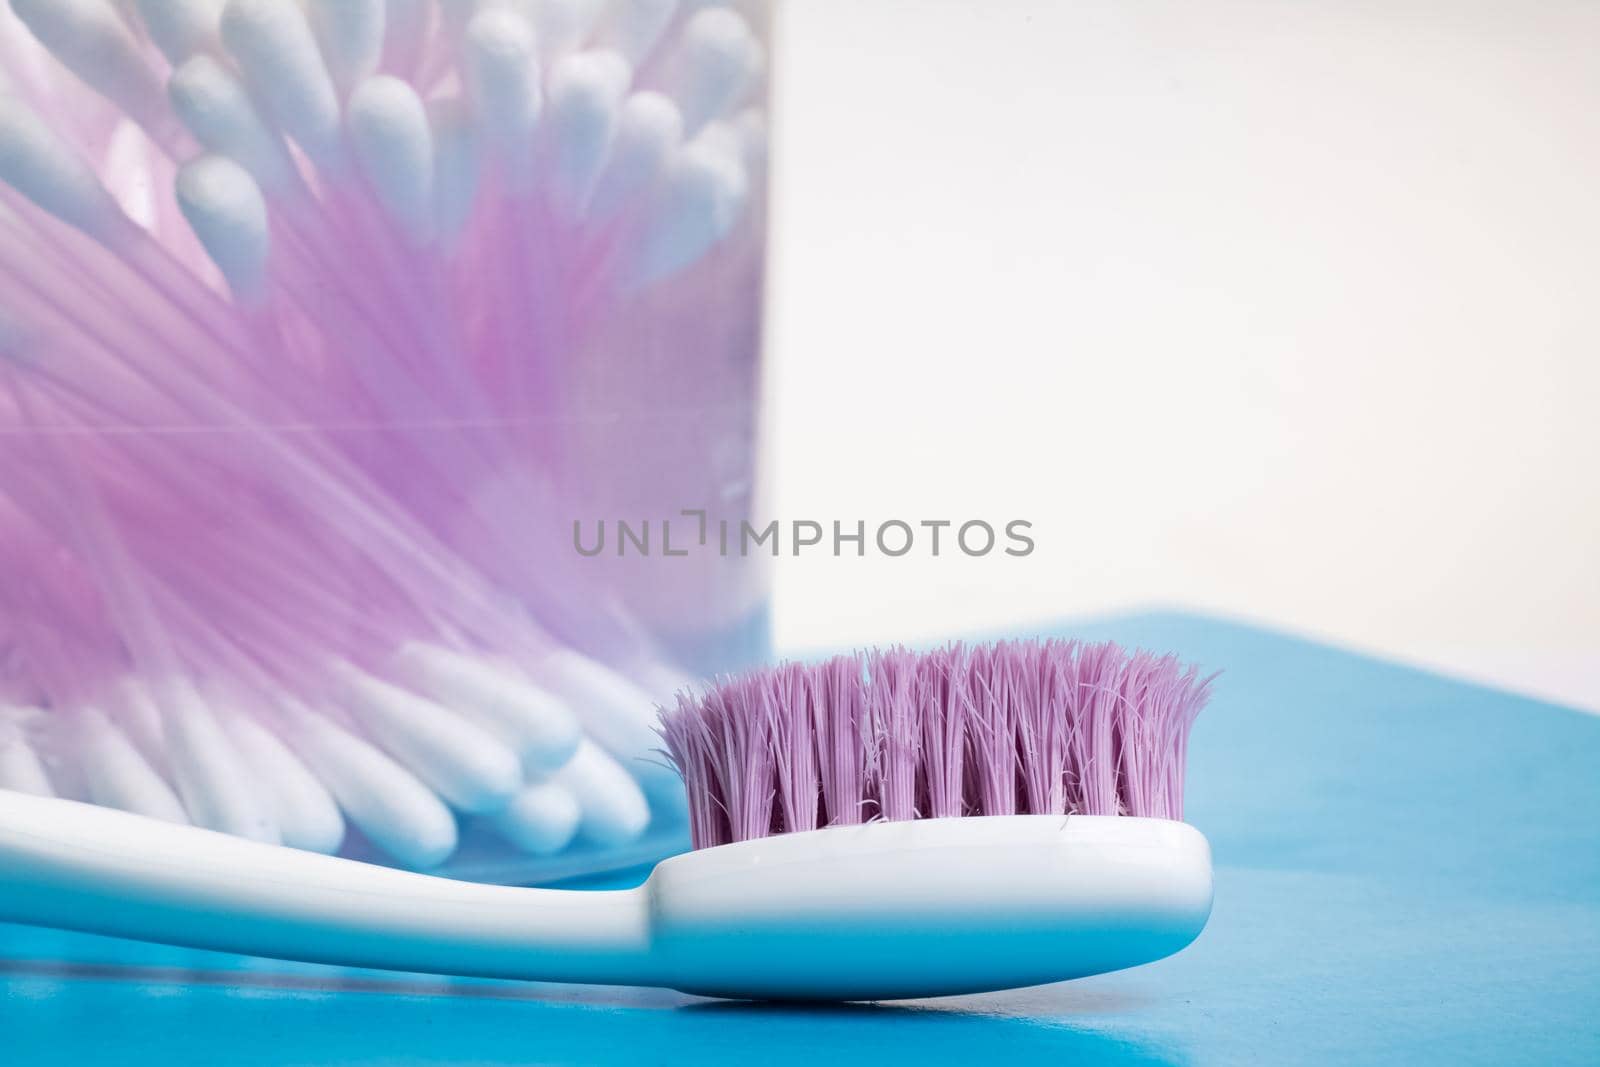 Cotton buds and toothbrush on the table in the bathroom close up